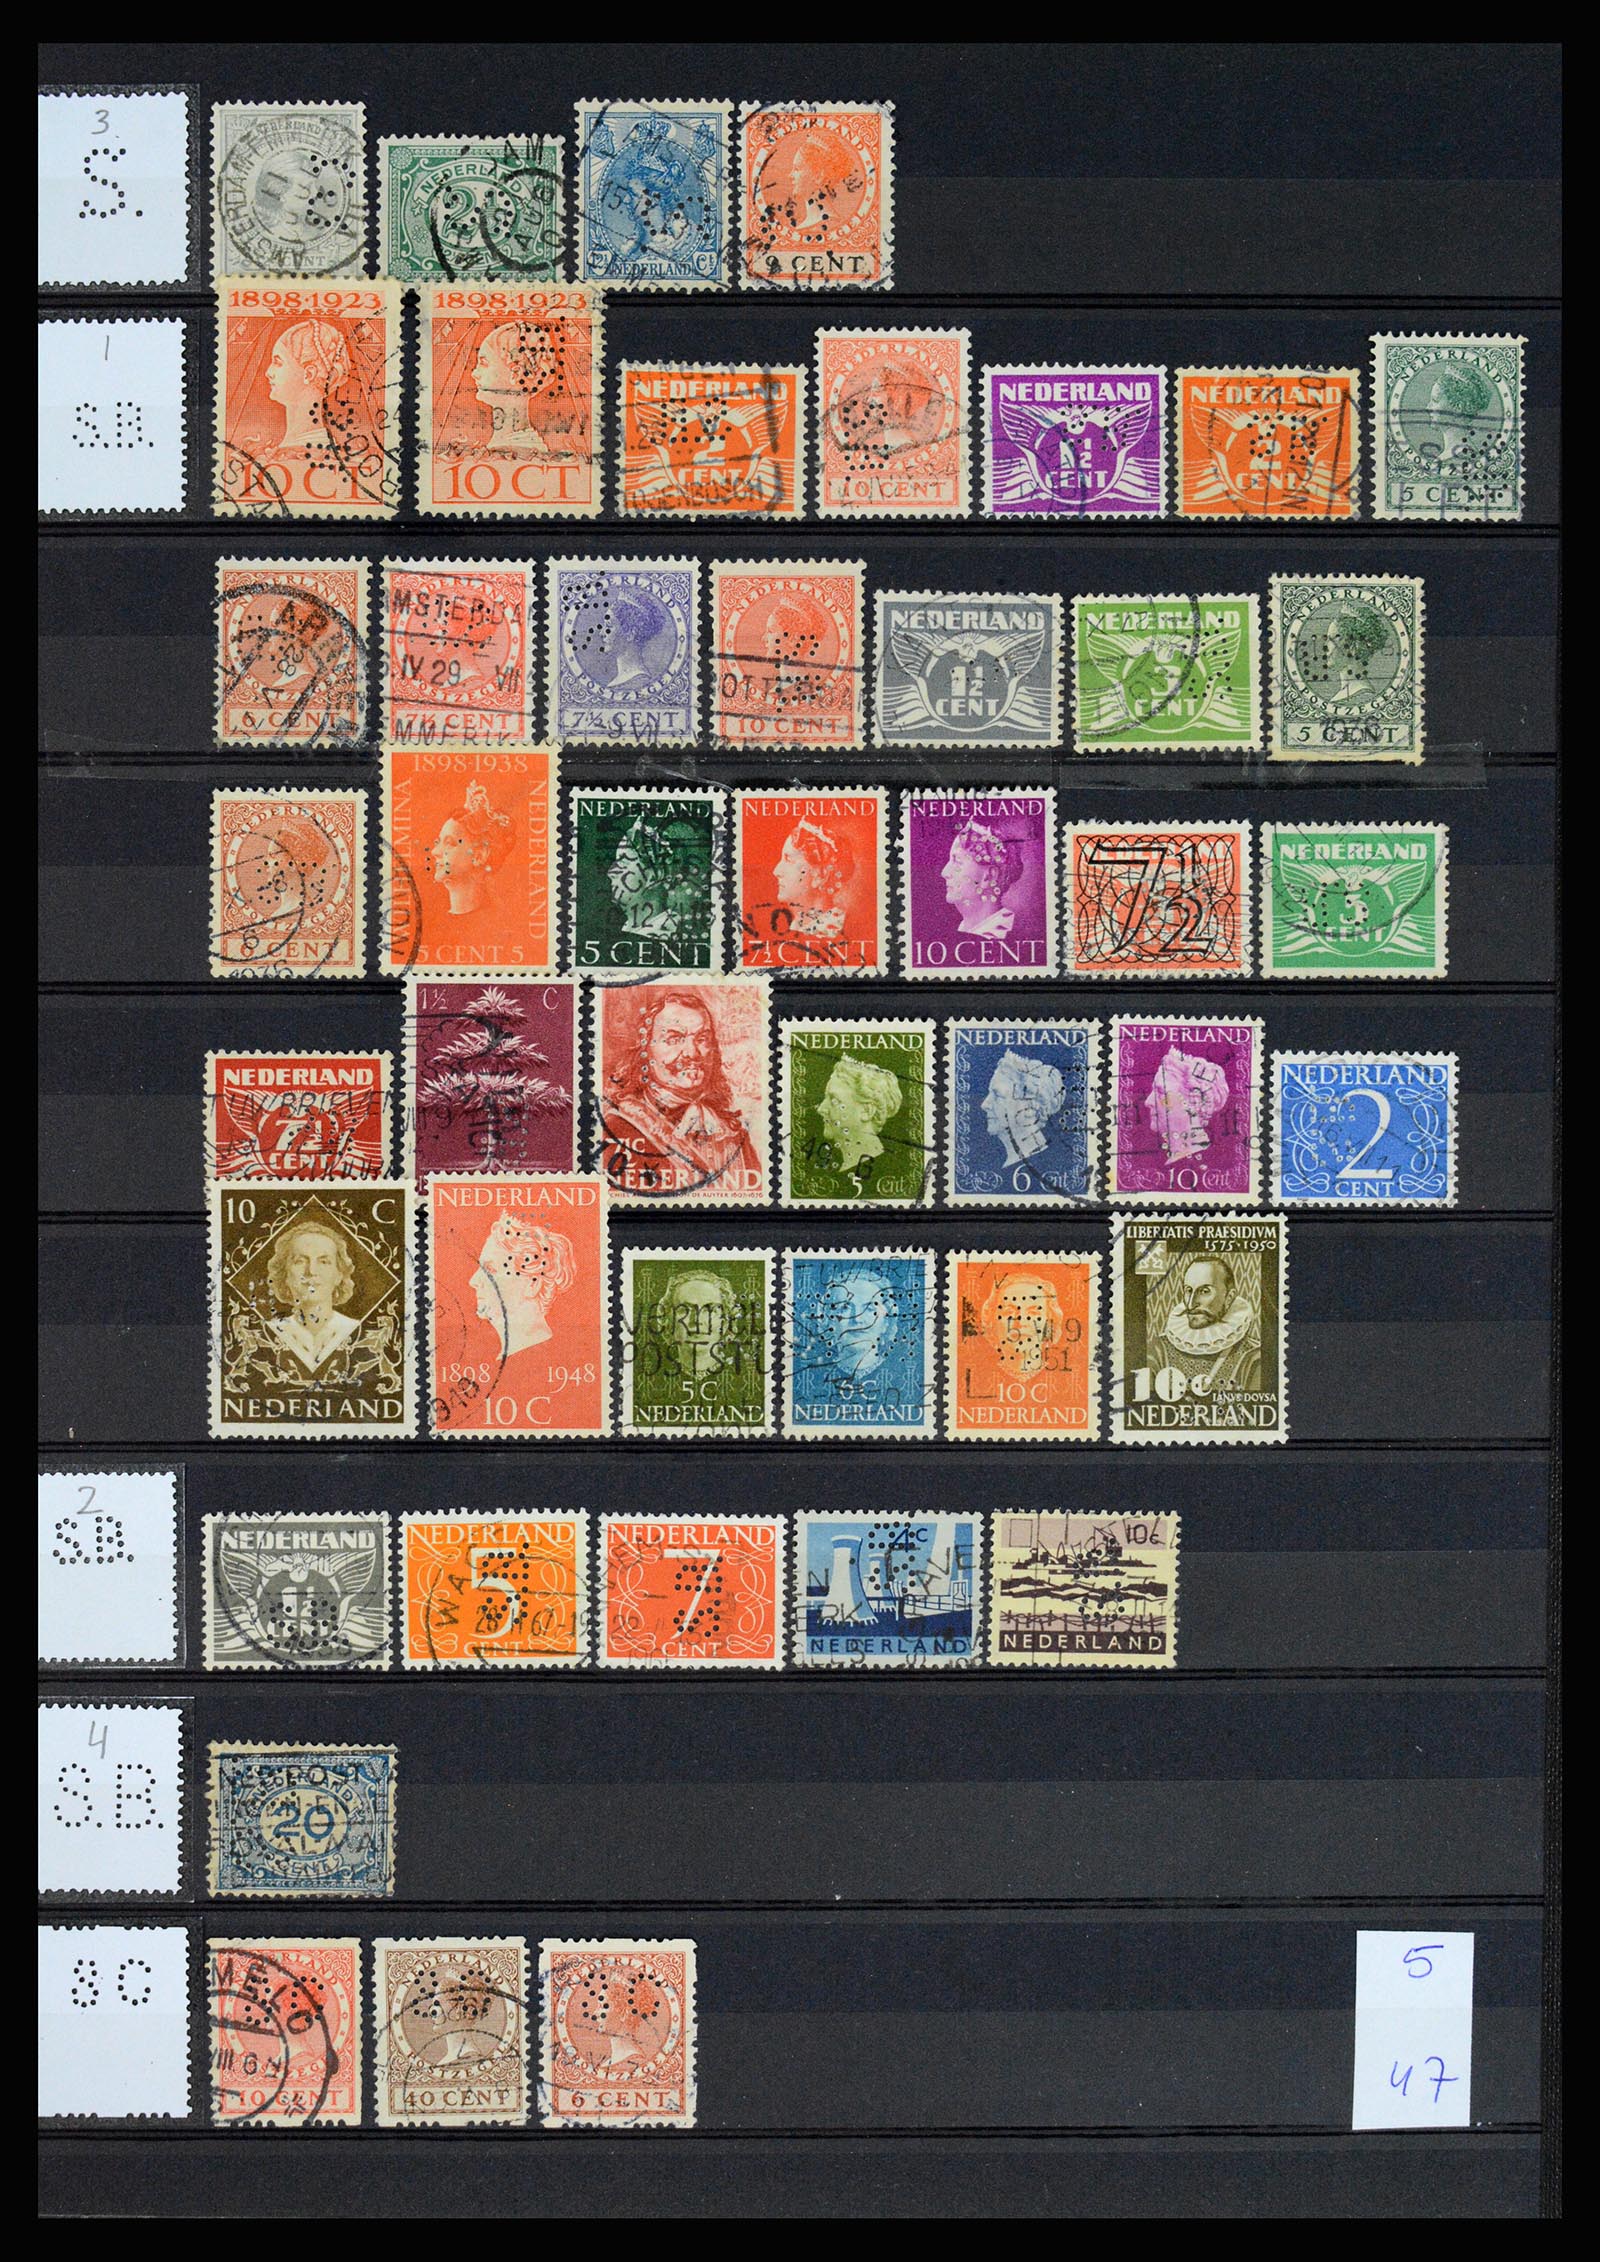 37183 045 - Stamp collection 37183 Netherlands perfins 1872-1960.